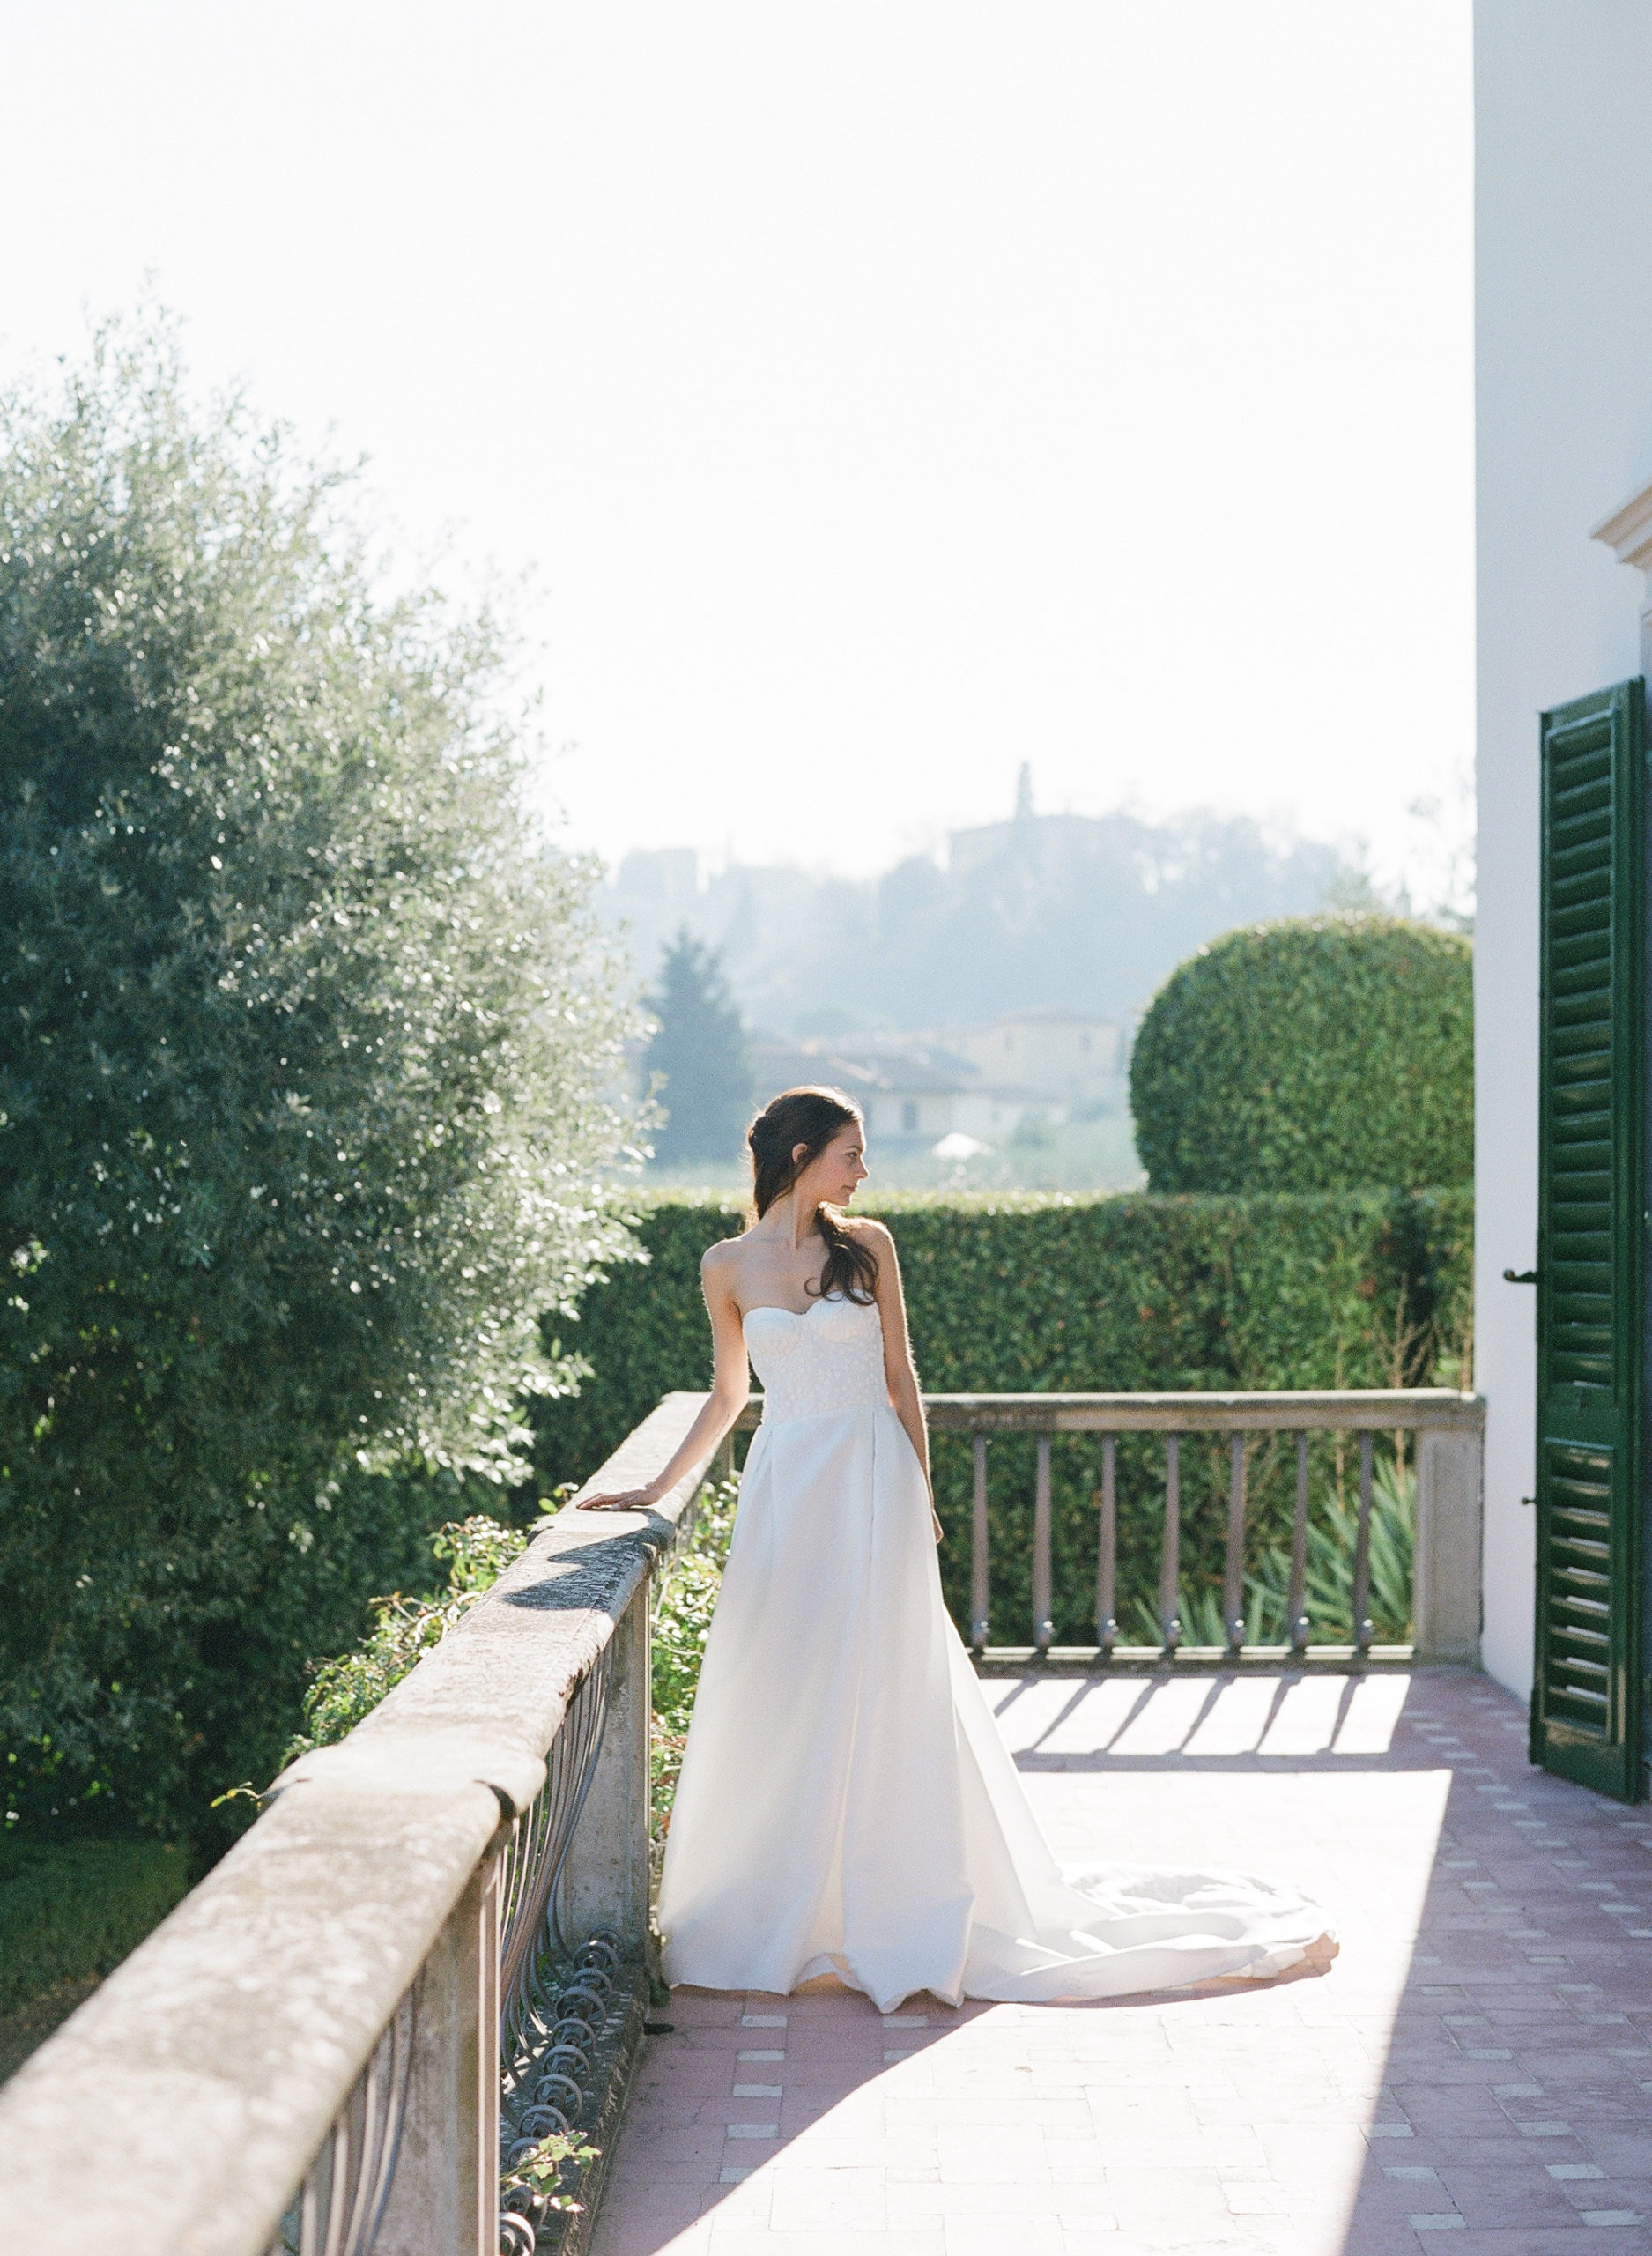 Wedding Photographer in Florence